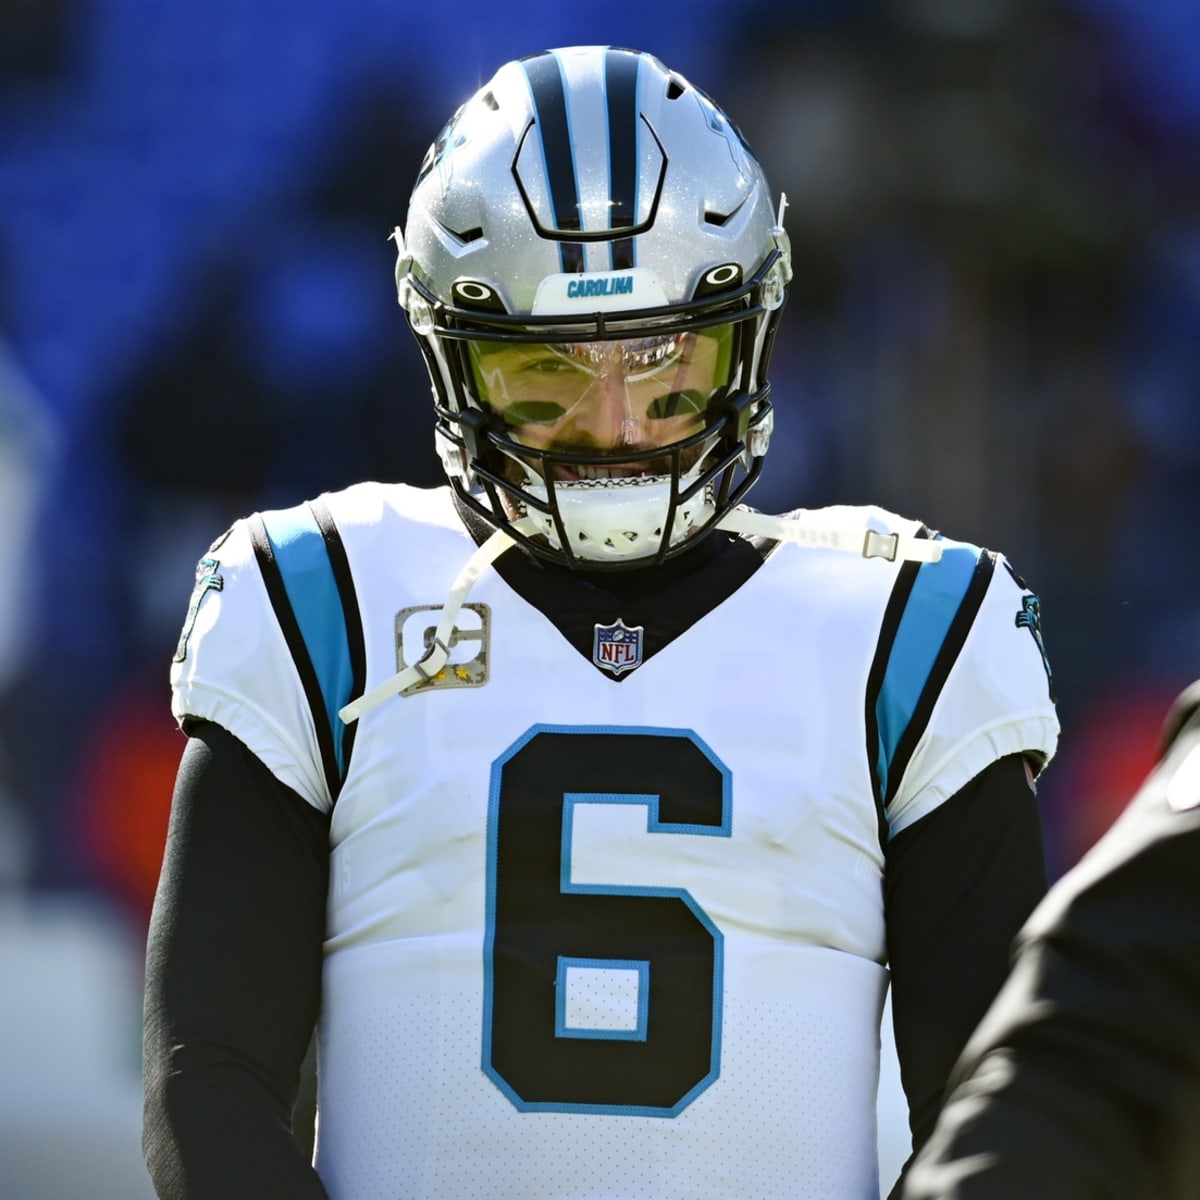 Baker Mayfield isn't starting for Panthers this weekend